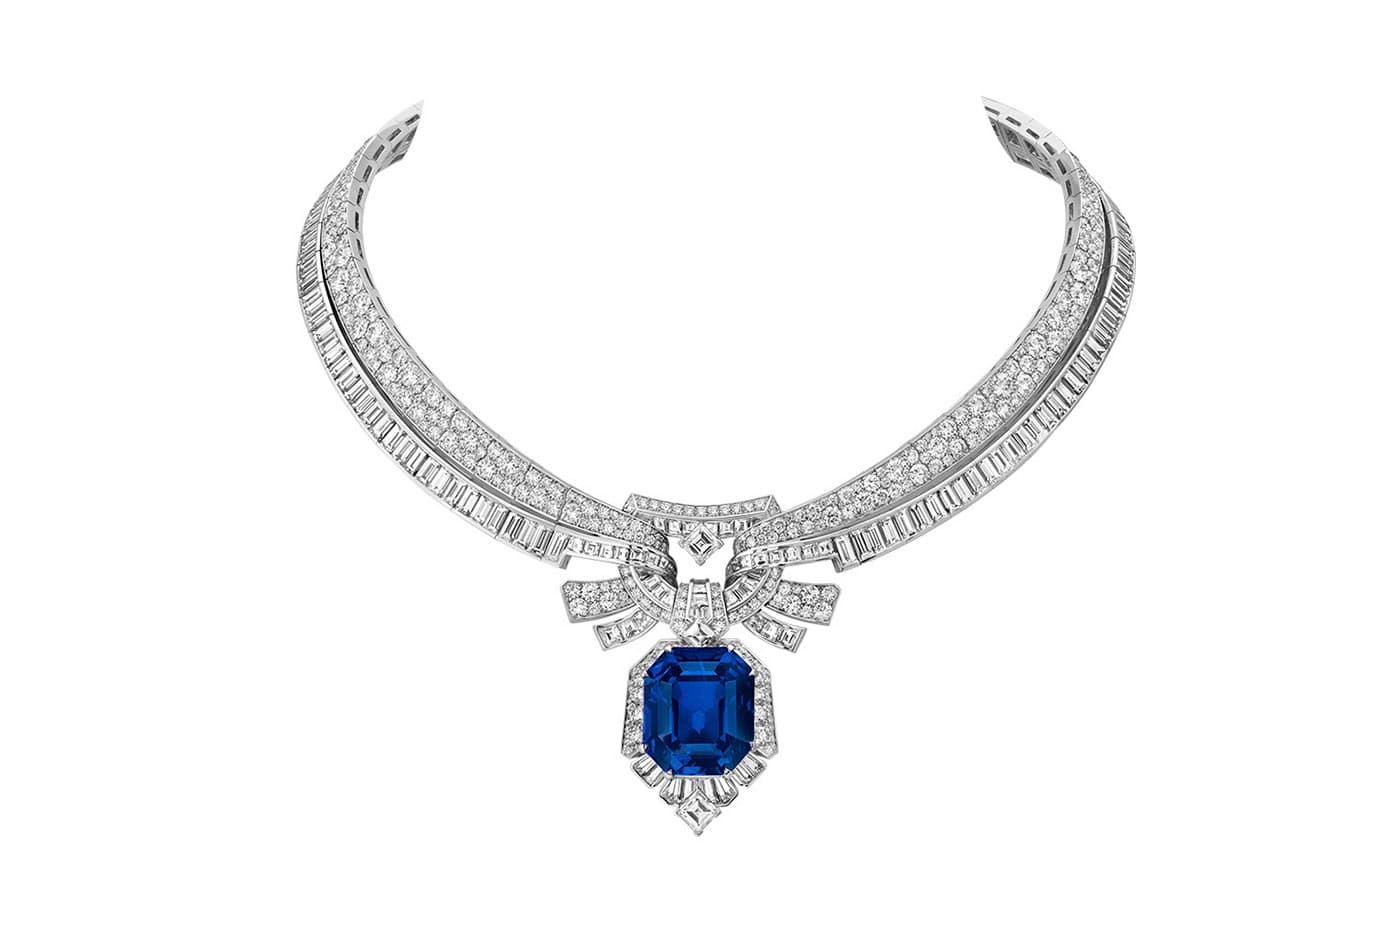 Van Cleef & Arpels 'Romeo and Juliet' collection 'Maiolika' necklace with Sri Lankan emerald cut sapphire of 42.86ct and diamonds in white gold 